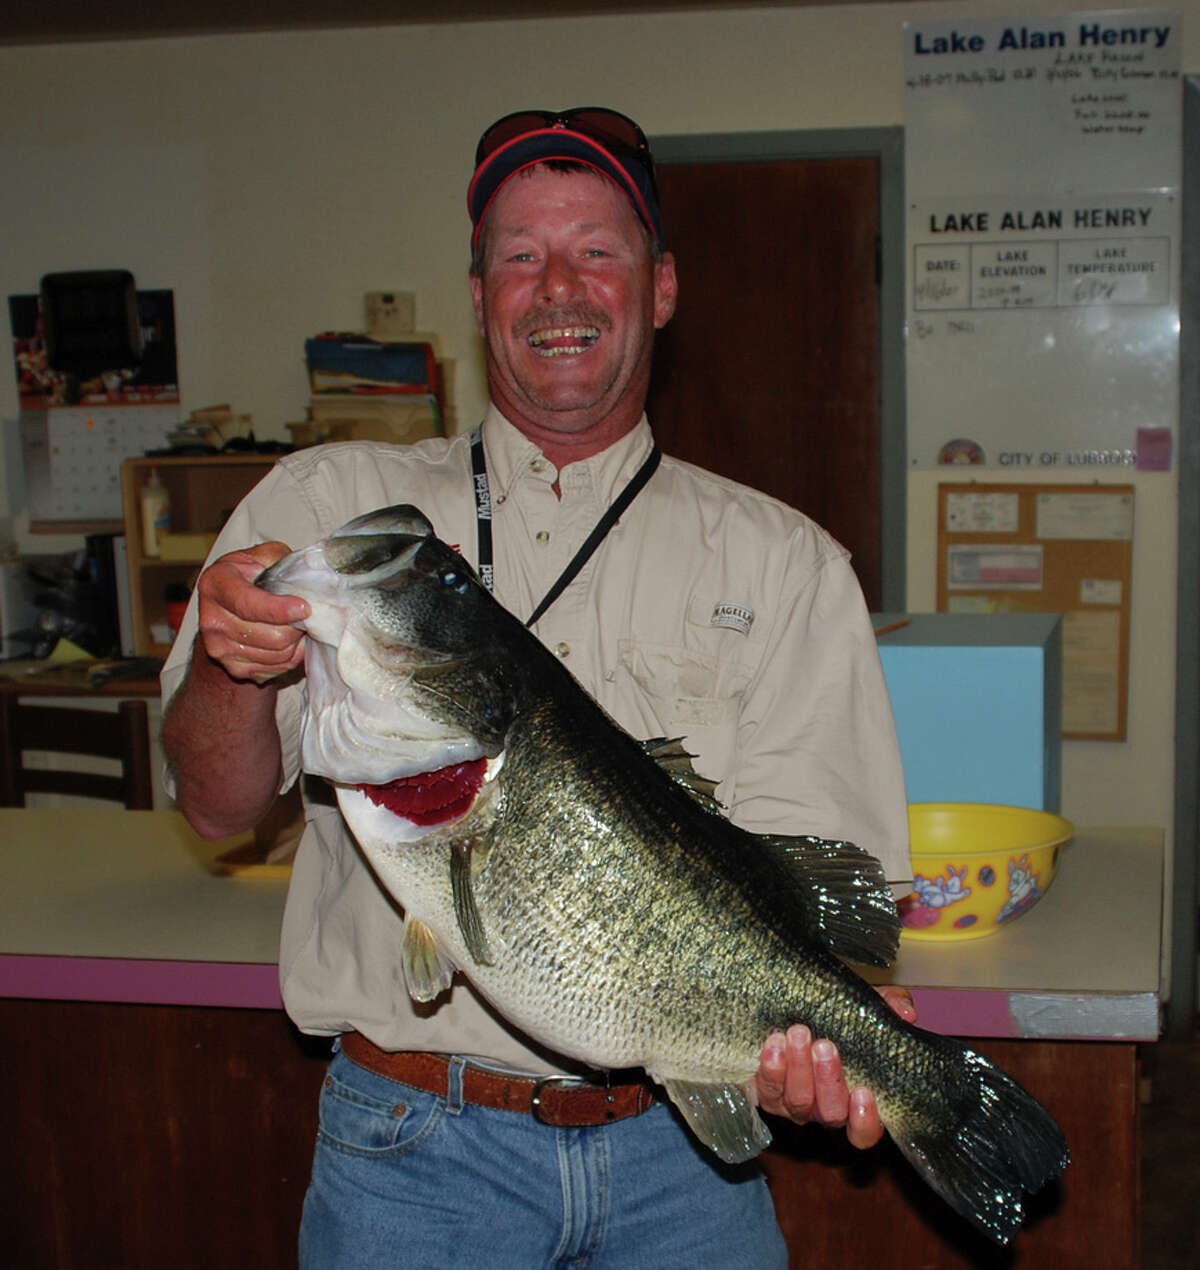 >>>Click through to see the best-but-little-known spots for anglers in West Texas Alan Henry Reservoir: “(This is) where anglers can find Alabama spotted bass. The Garza County lake also happens to be the number one largemouth bass lake in the Amarillo district, having produced more than 27 Toyota ShareLunker Legacy Class largemouth bass over 13 pounds and many other reported double-digit bass since its impoundment. The Sam Wahl Recreation Area has an excellent dock and fishing pier facilities along with primitive campsites and places to park self-contained RV’s.”